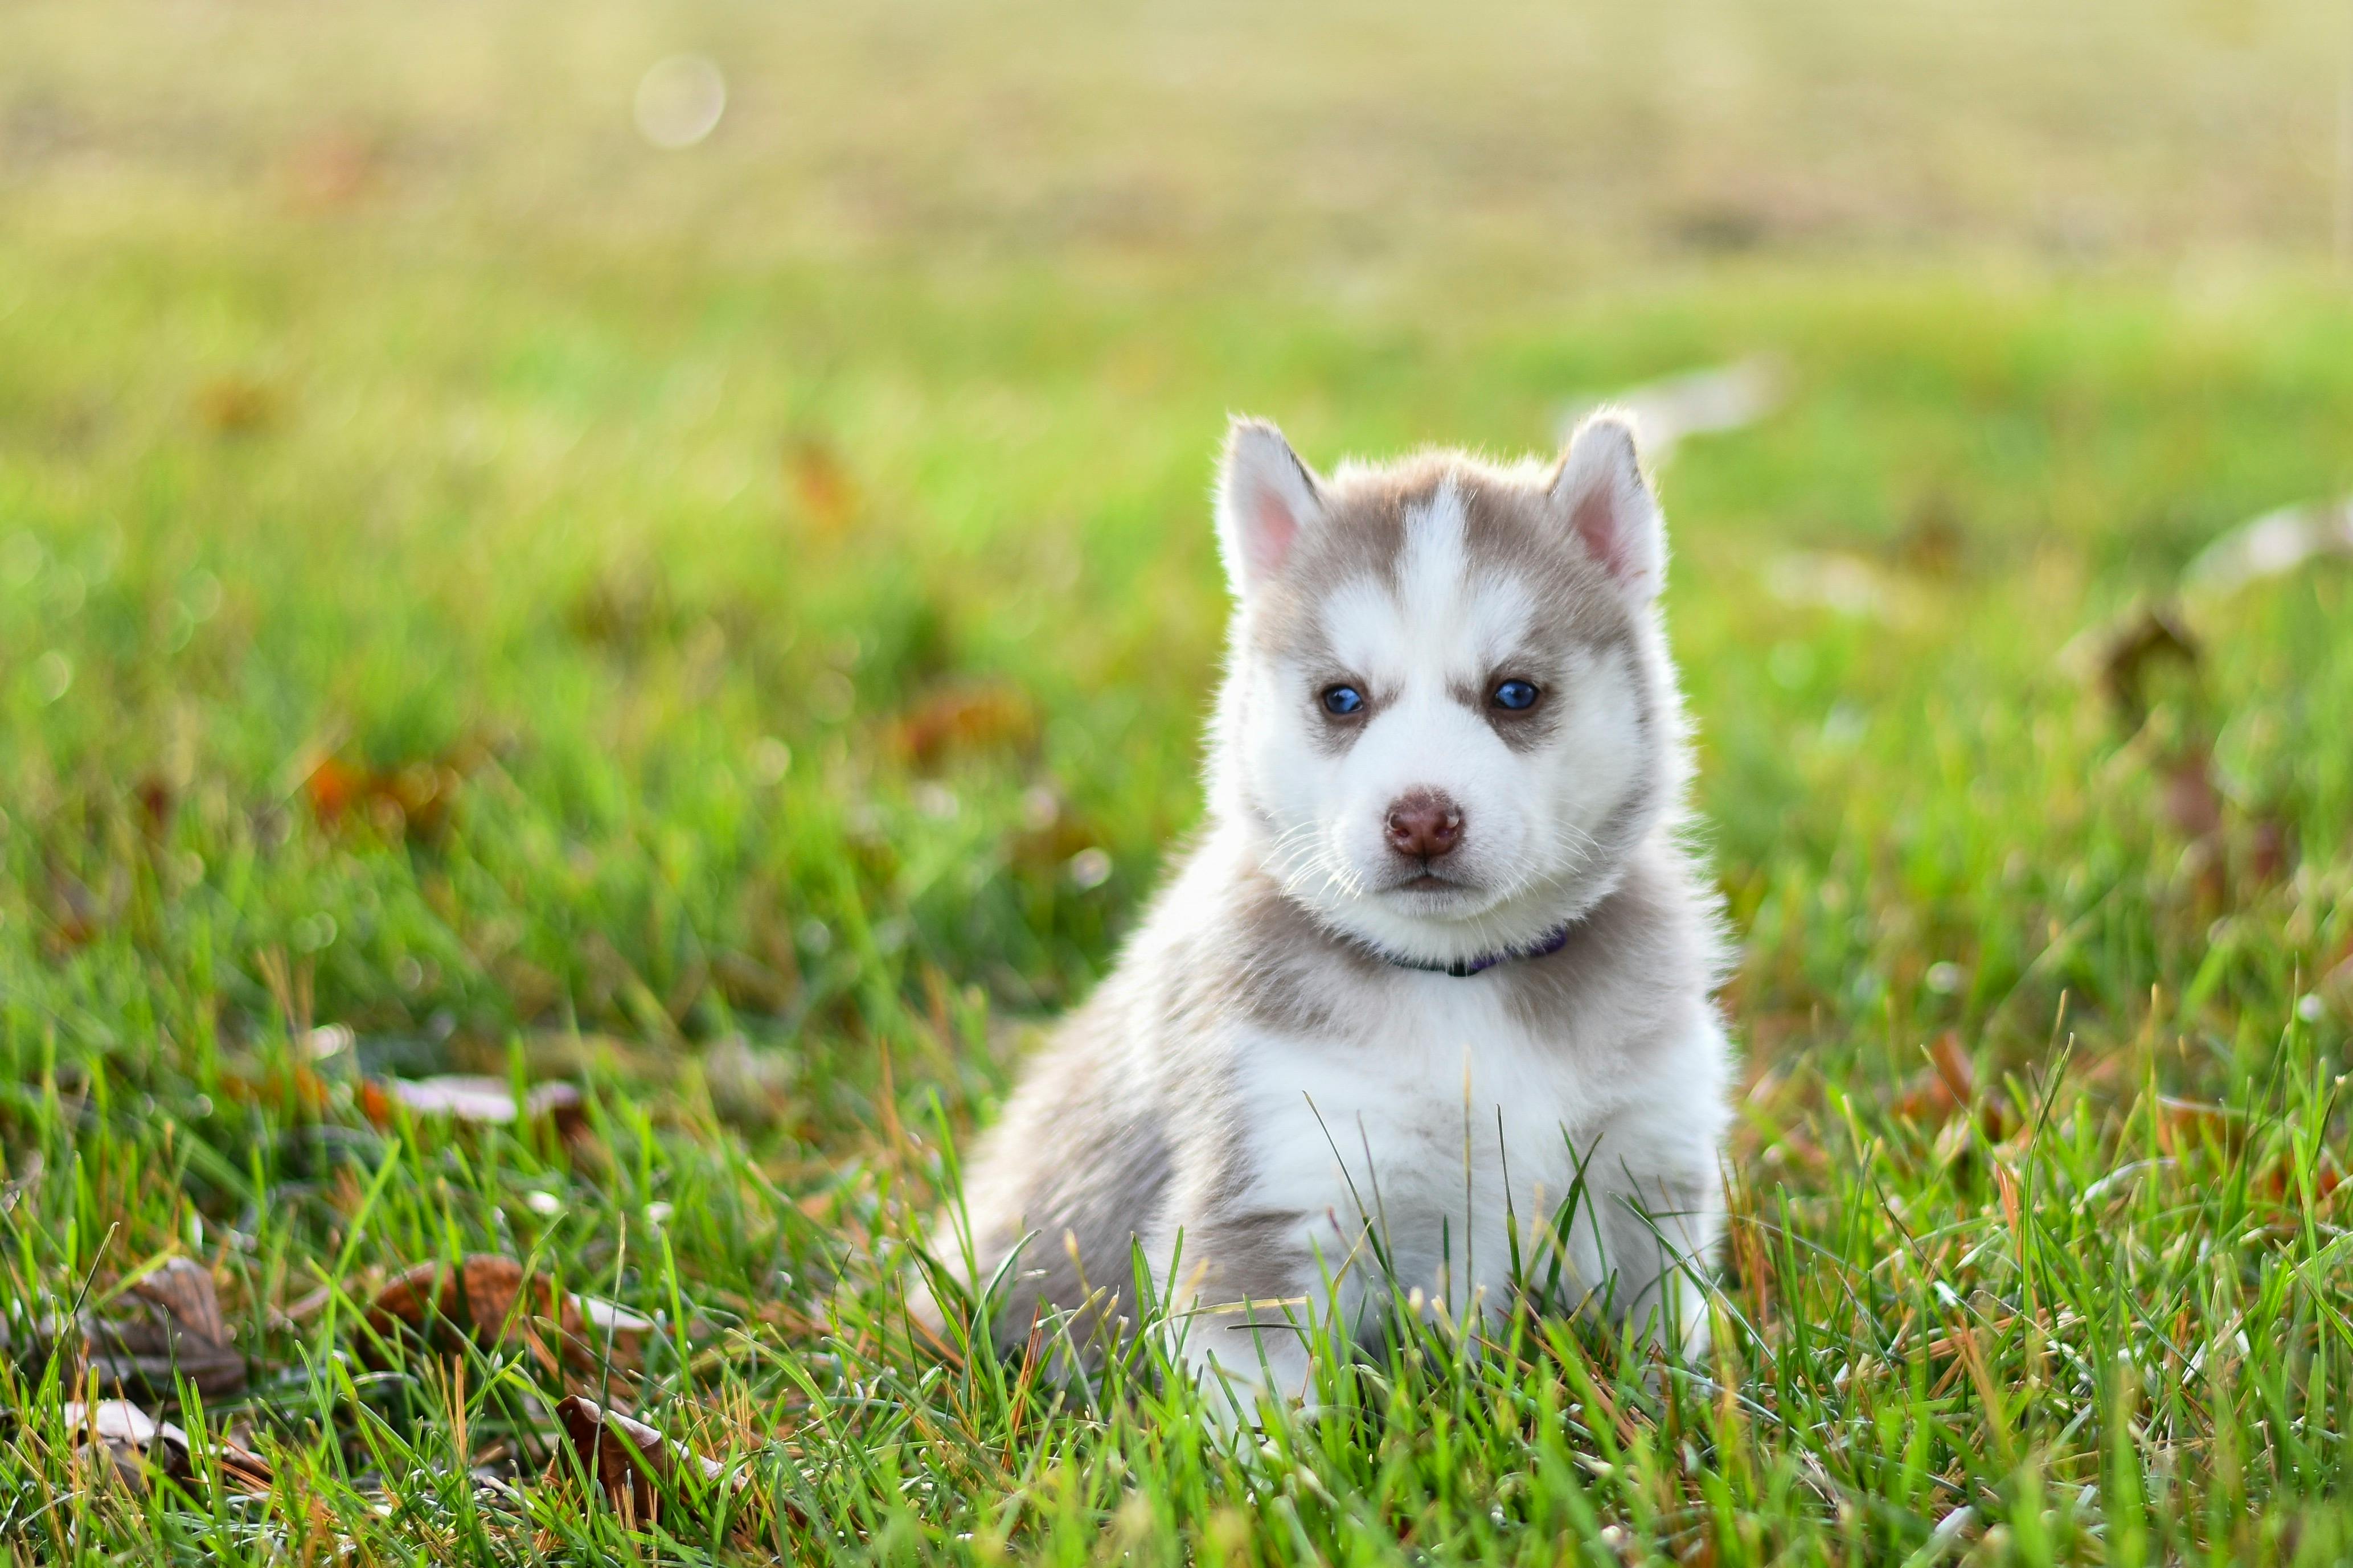 An adorable puppy playing on the grass. | Photo: Pexels